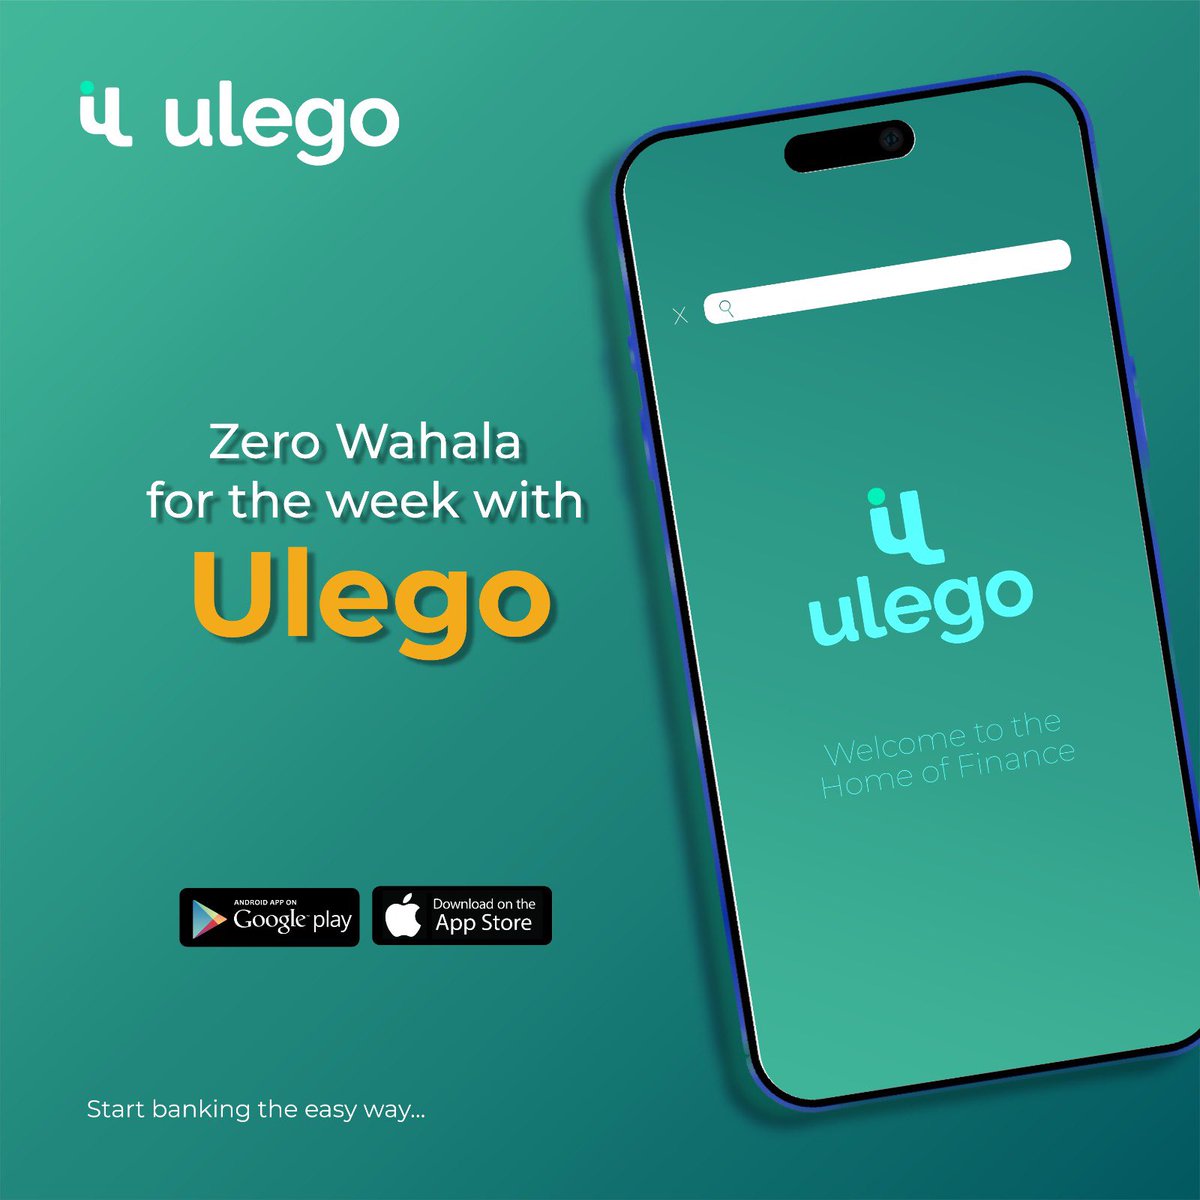 Start your week easyyy with zero transactions errors and zero charges. And more amazing features awaits you … Have you downloaded the Ulego App yet? #BetAwards2023 #TECH4ALL #fintech